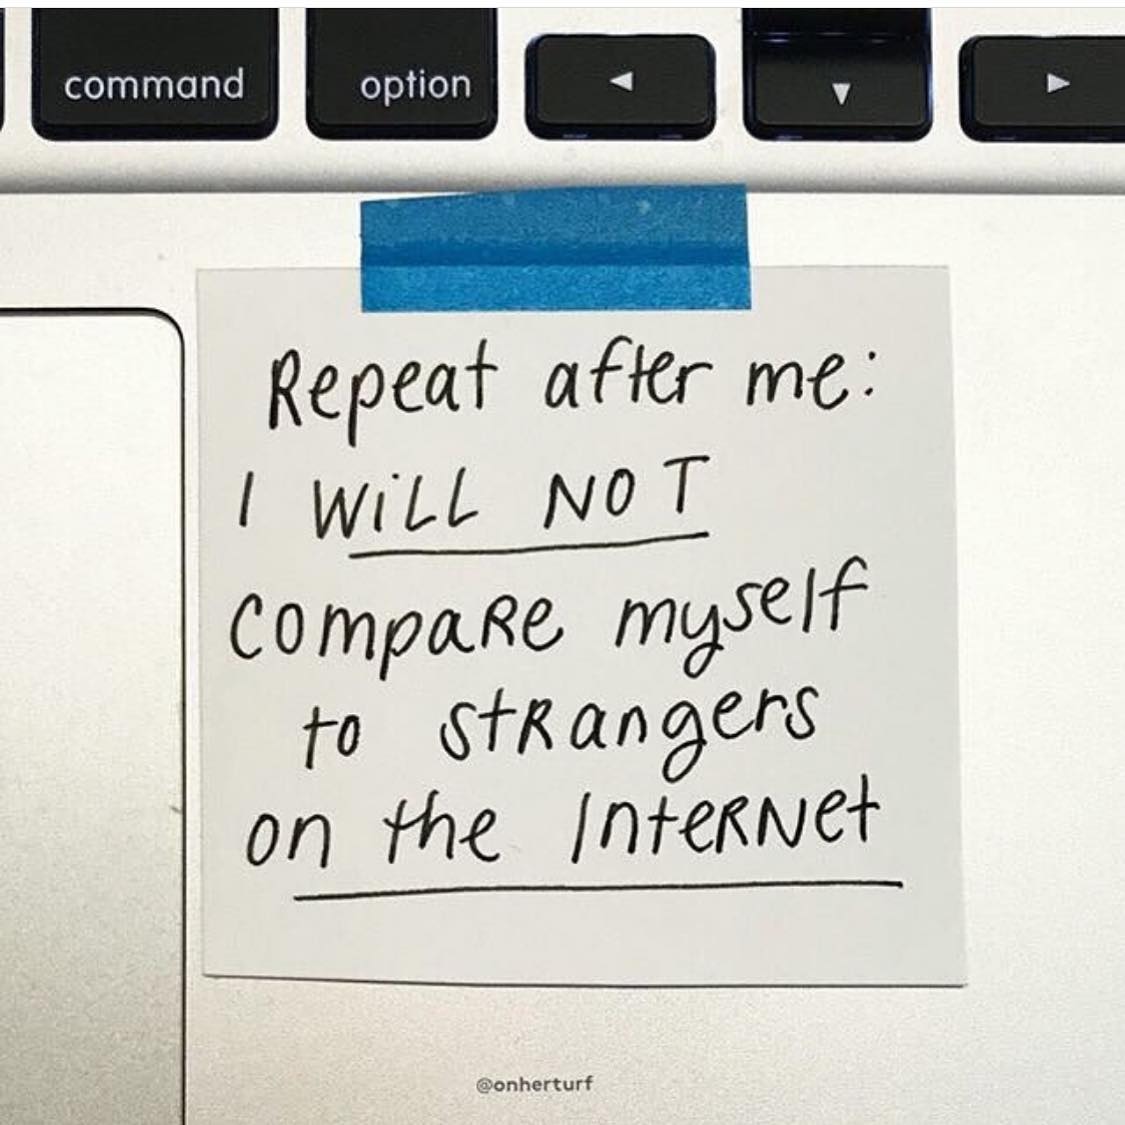 repeat after me: I will not compare myself to strangers on the internet